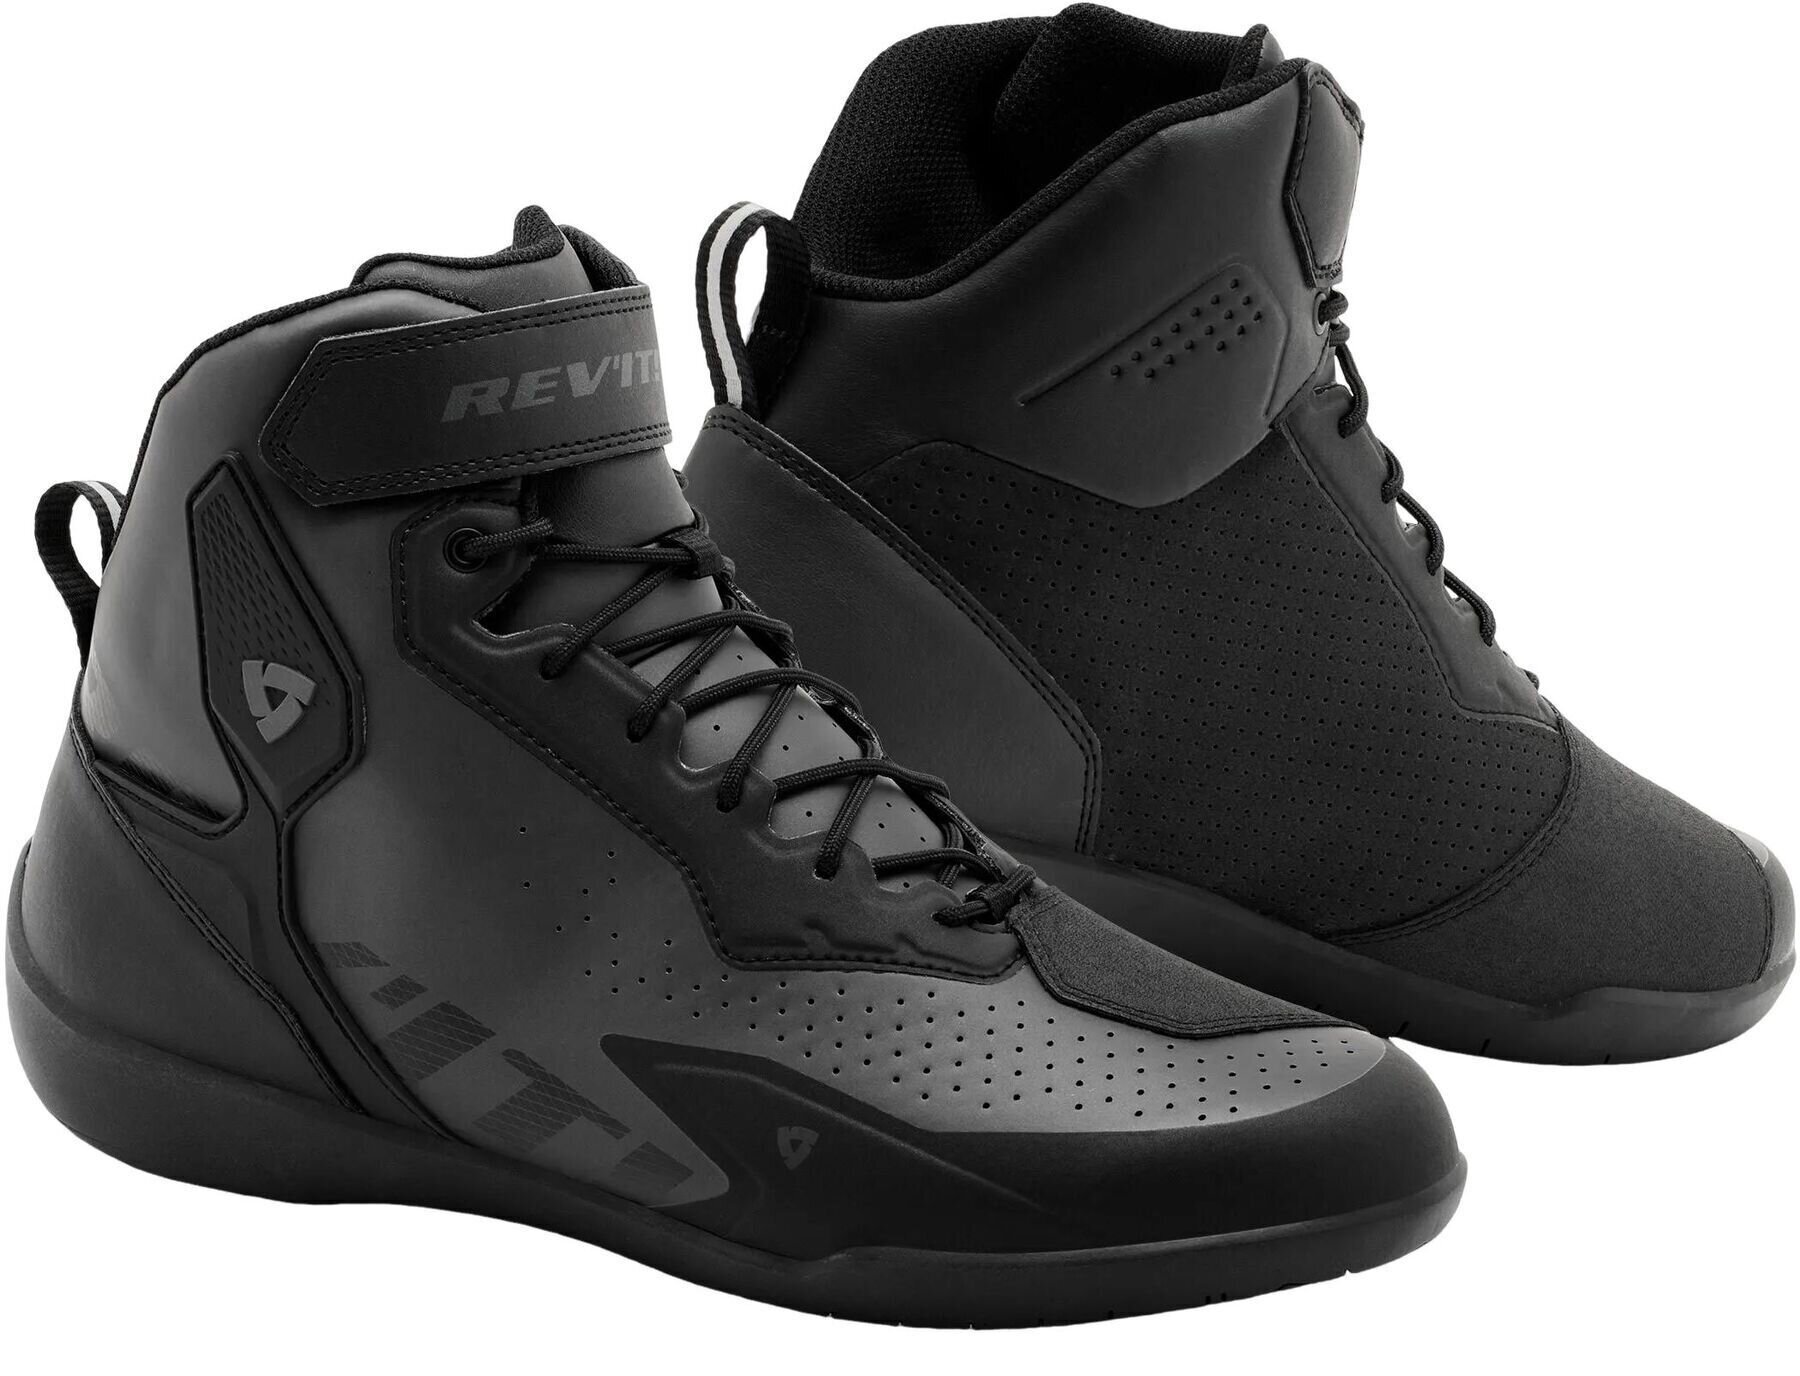 Photos - Motorcycle Clothing Rev'it! Rev'it! Shoes G-Force 2 Black/Anthracite 43 Motorcycle Boots FBR10